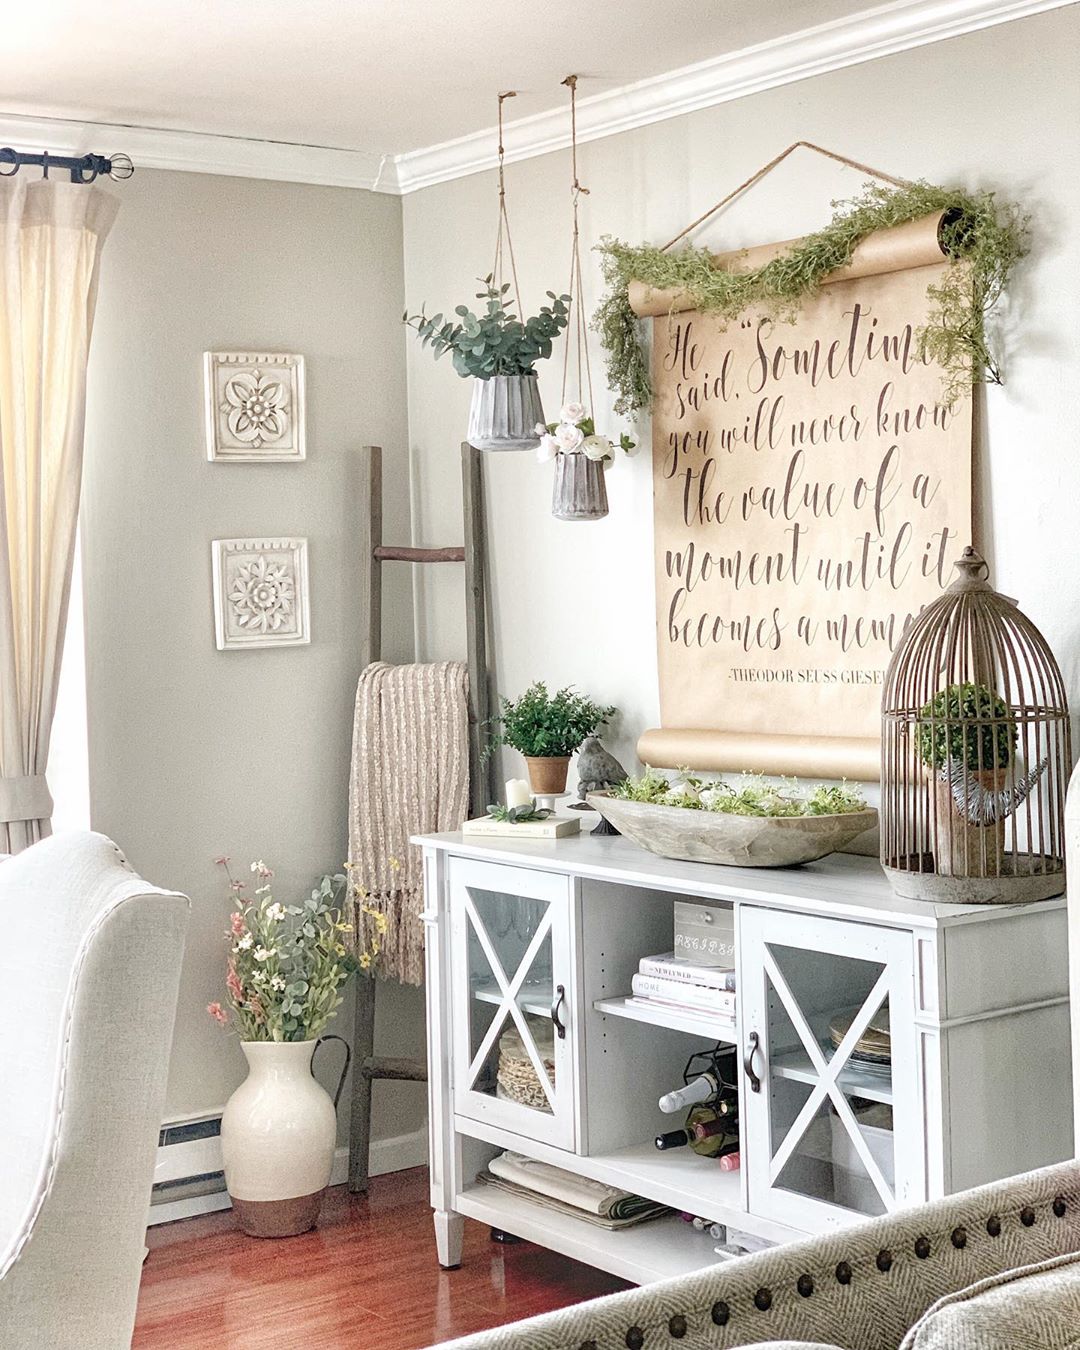 18 Farmhouse Decorating Ideas For Your, How To Decorate A Living Room Wall Farmhouse Style